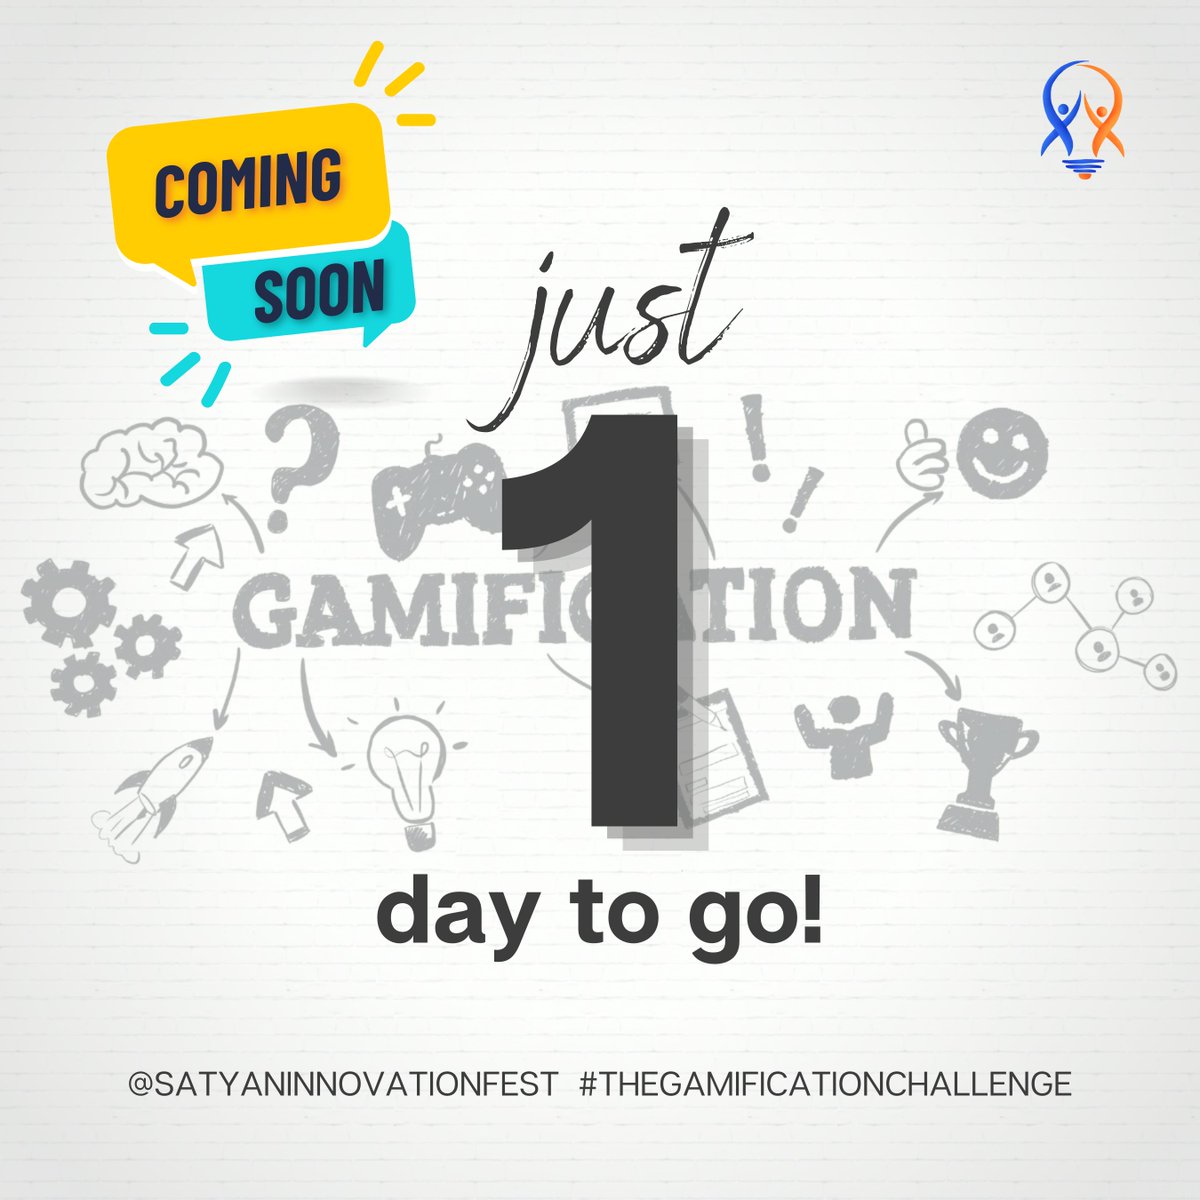 Only 1 days to go...
Find new ways to innovate SIF 2.0, coming soon.
#SIF2022 #InstitutionOfExcellence #Satyan #LearningWithoutLimits
#EmpoweredLeader #ResponsibleCitizen